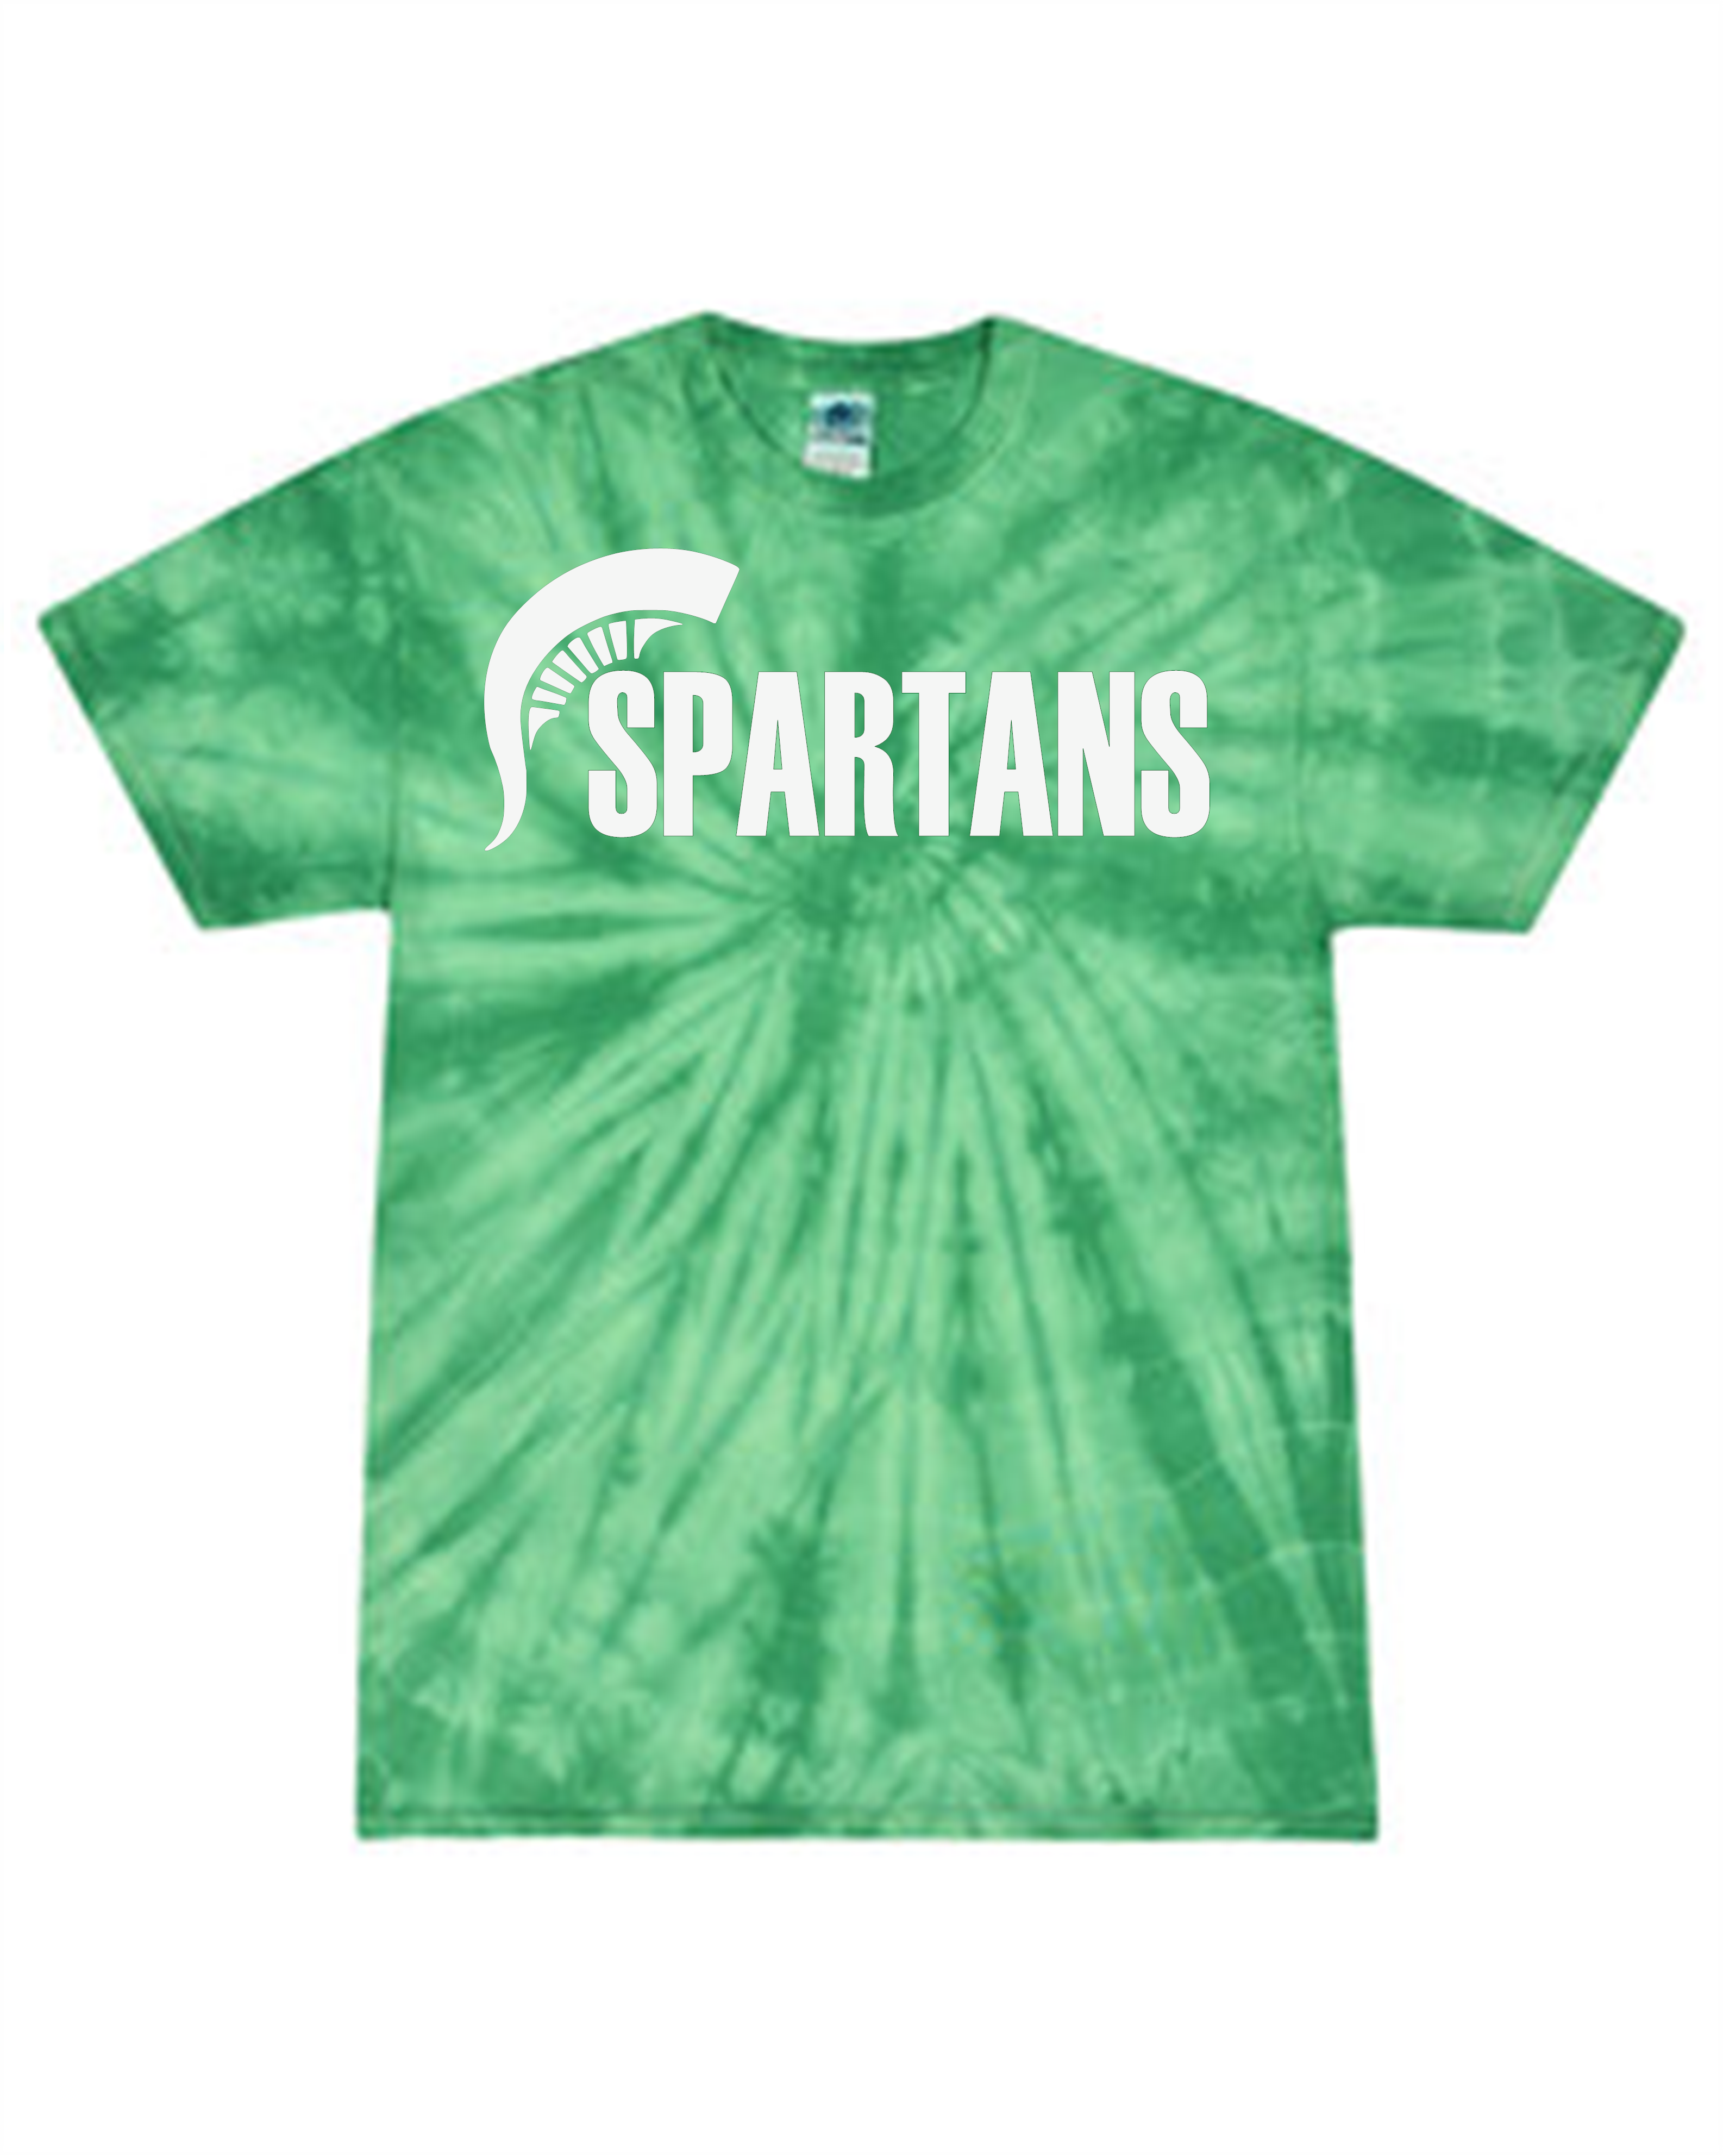 Green Tie-Dye Spartans YOUTH T-Shirt